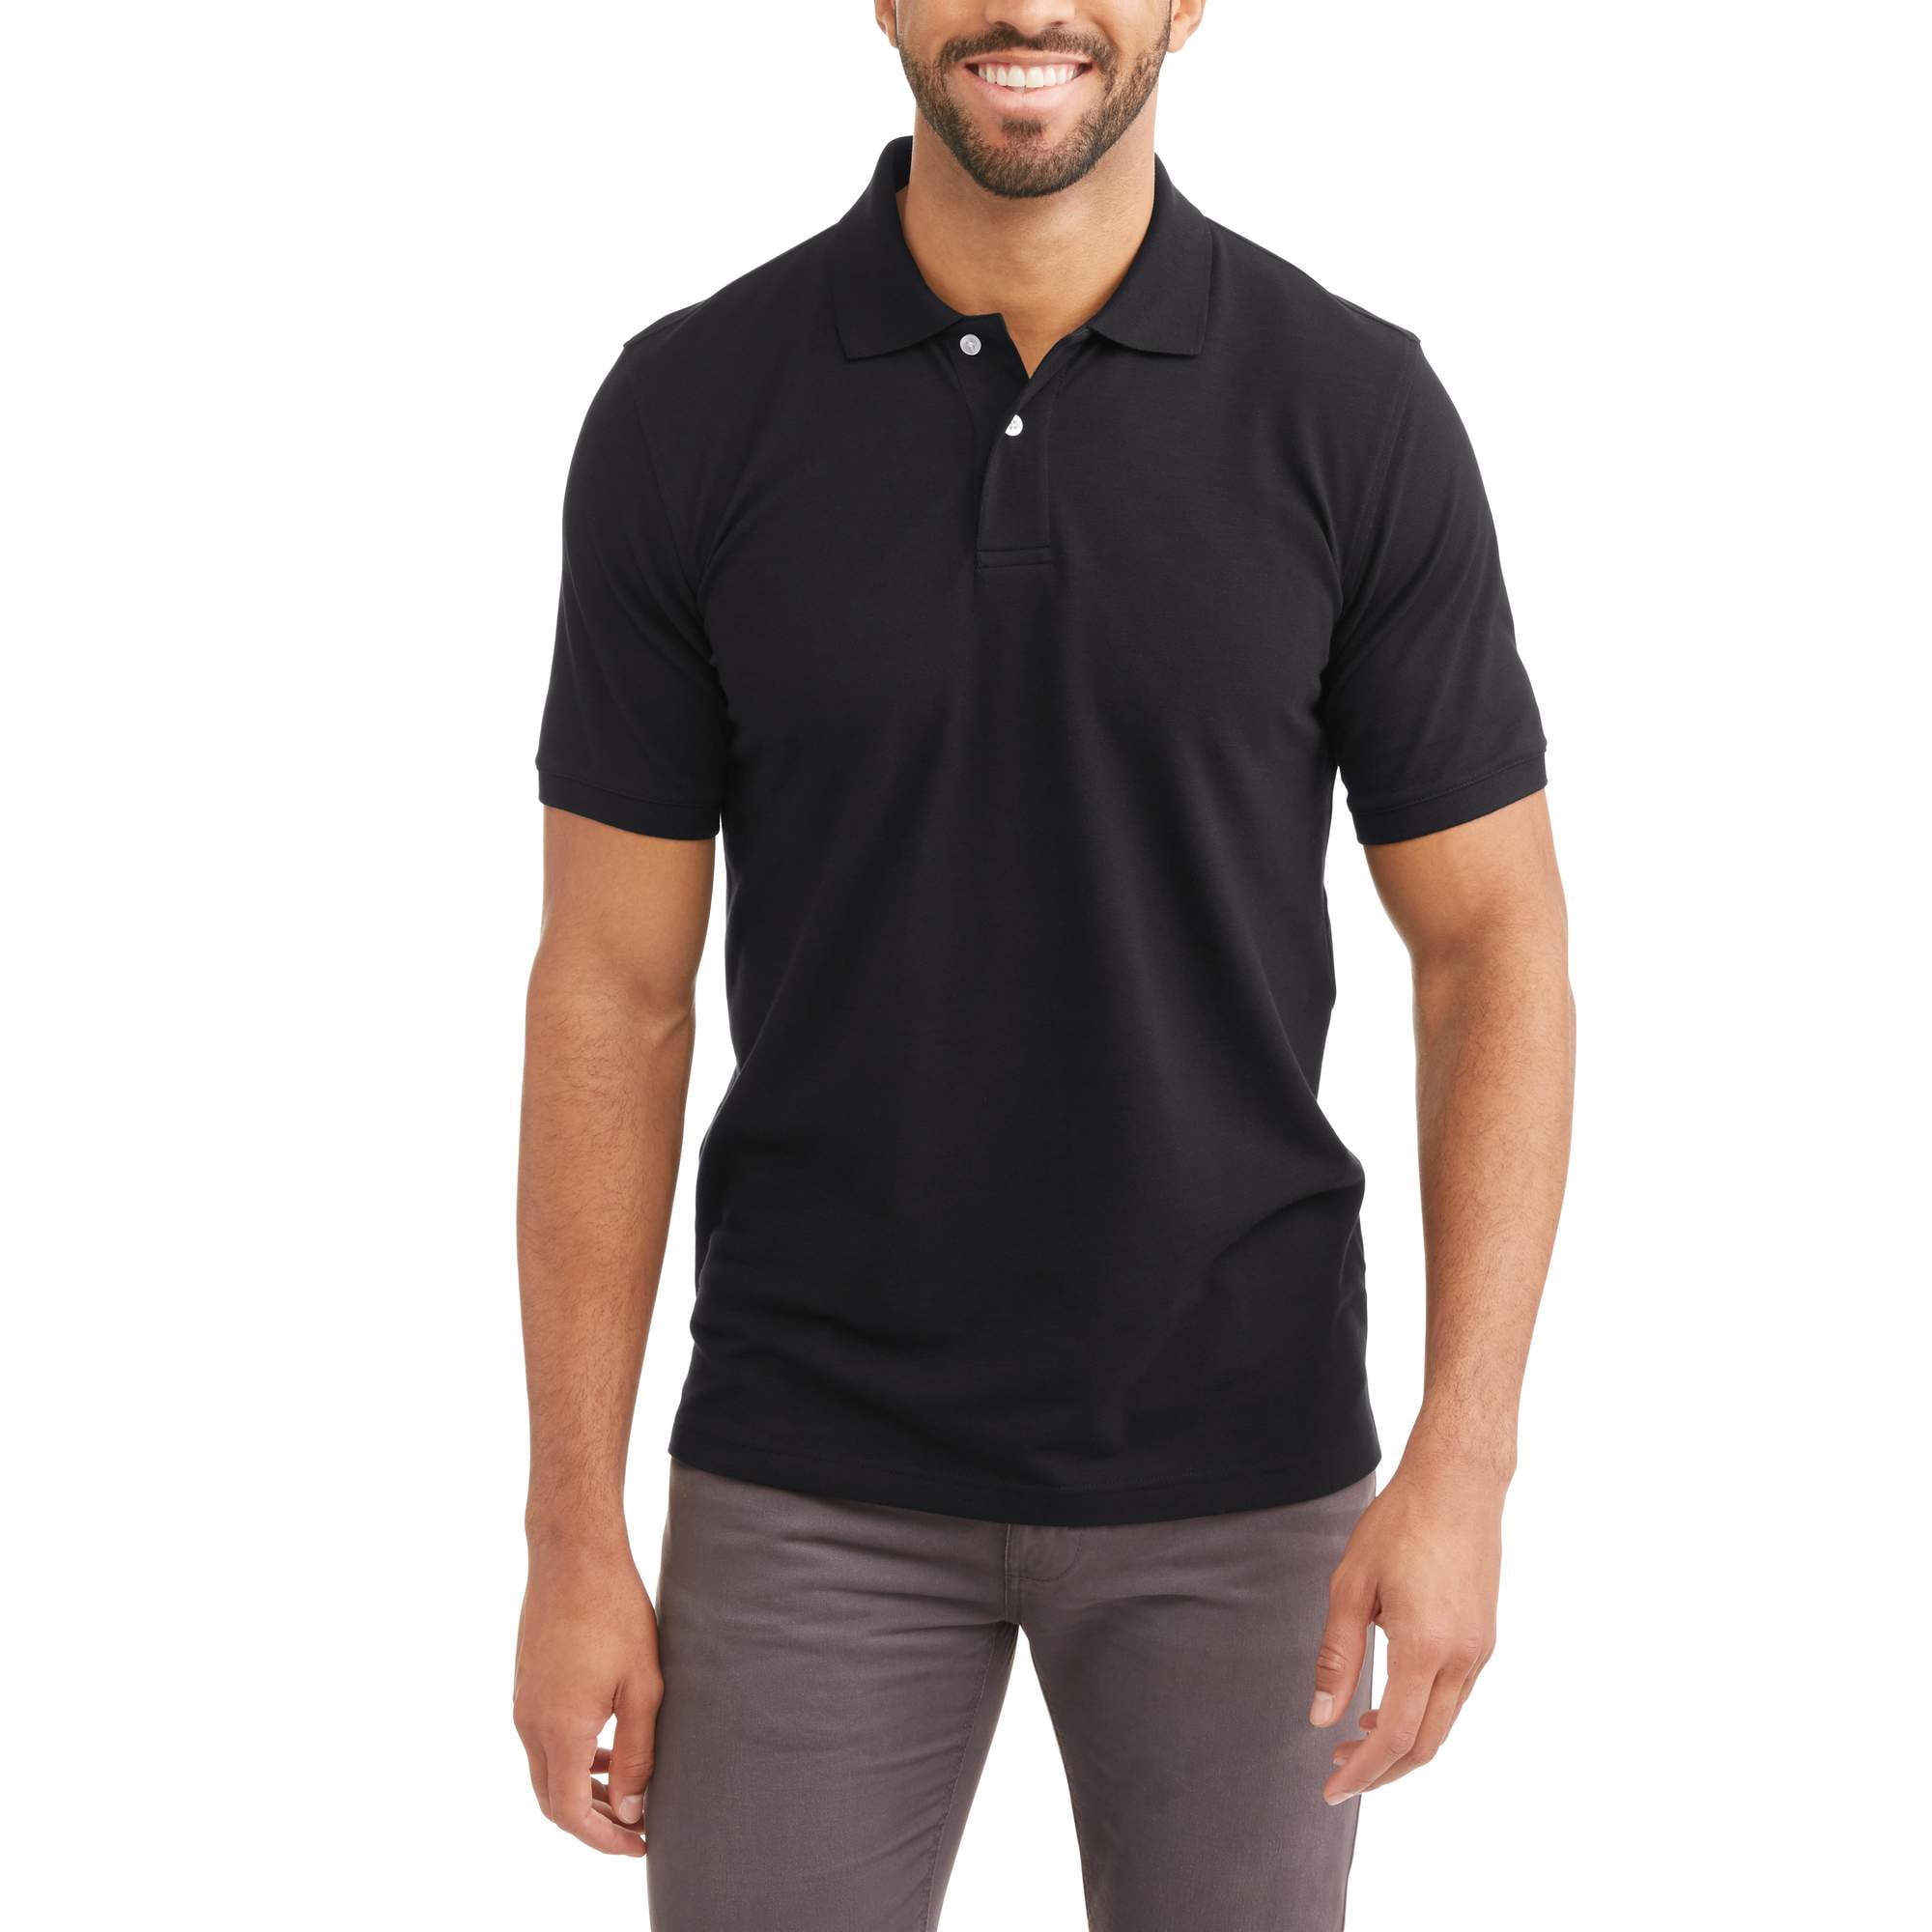 GEORGE - George Men's Short Sleeve Pique Polo,Up to Size 5XL - Walmart ...